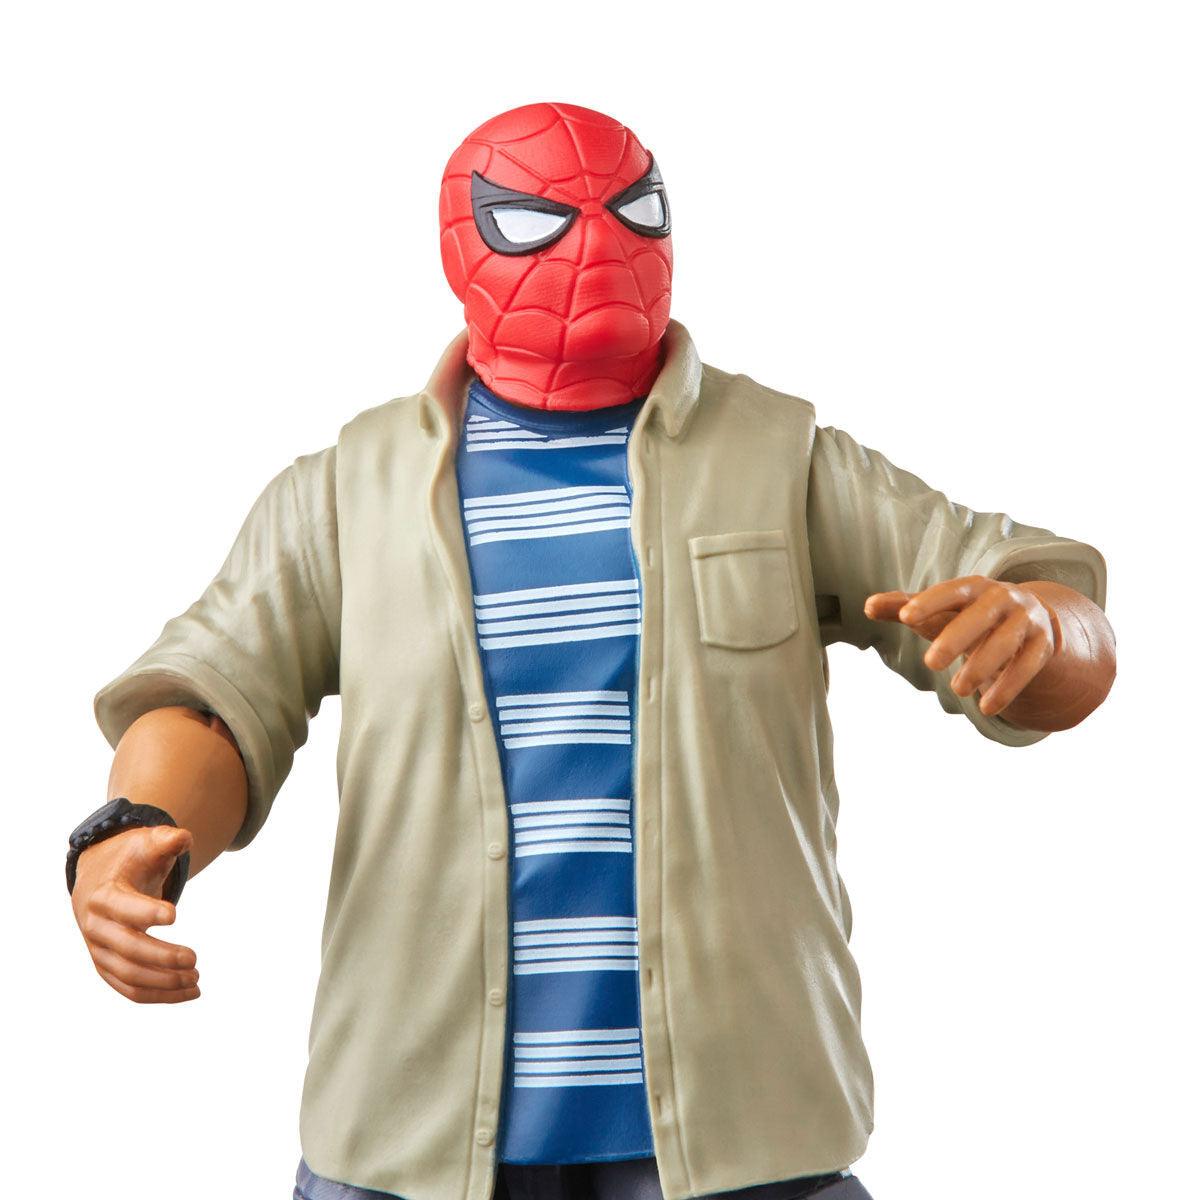 Spider-Man Homecoming - Statuette Premier Collection Spider-Man 30